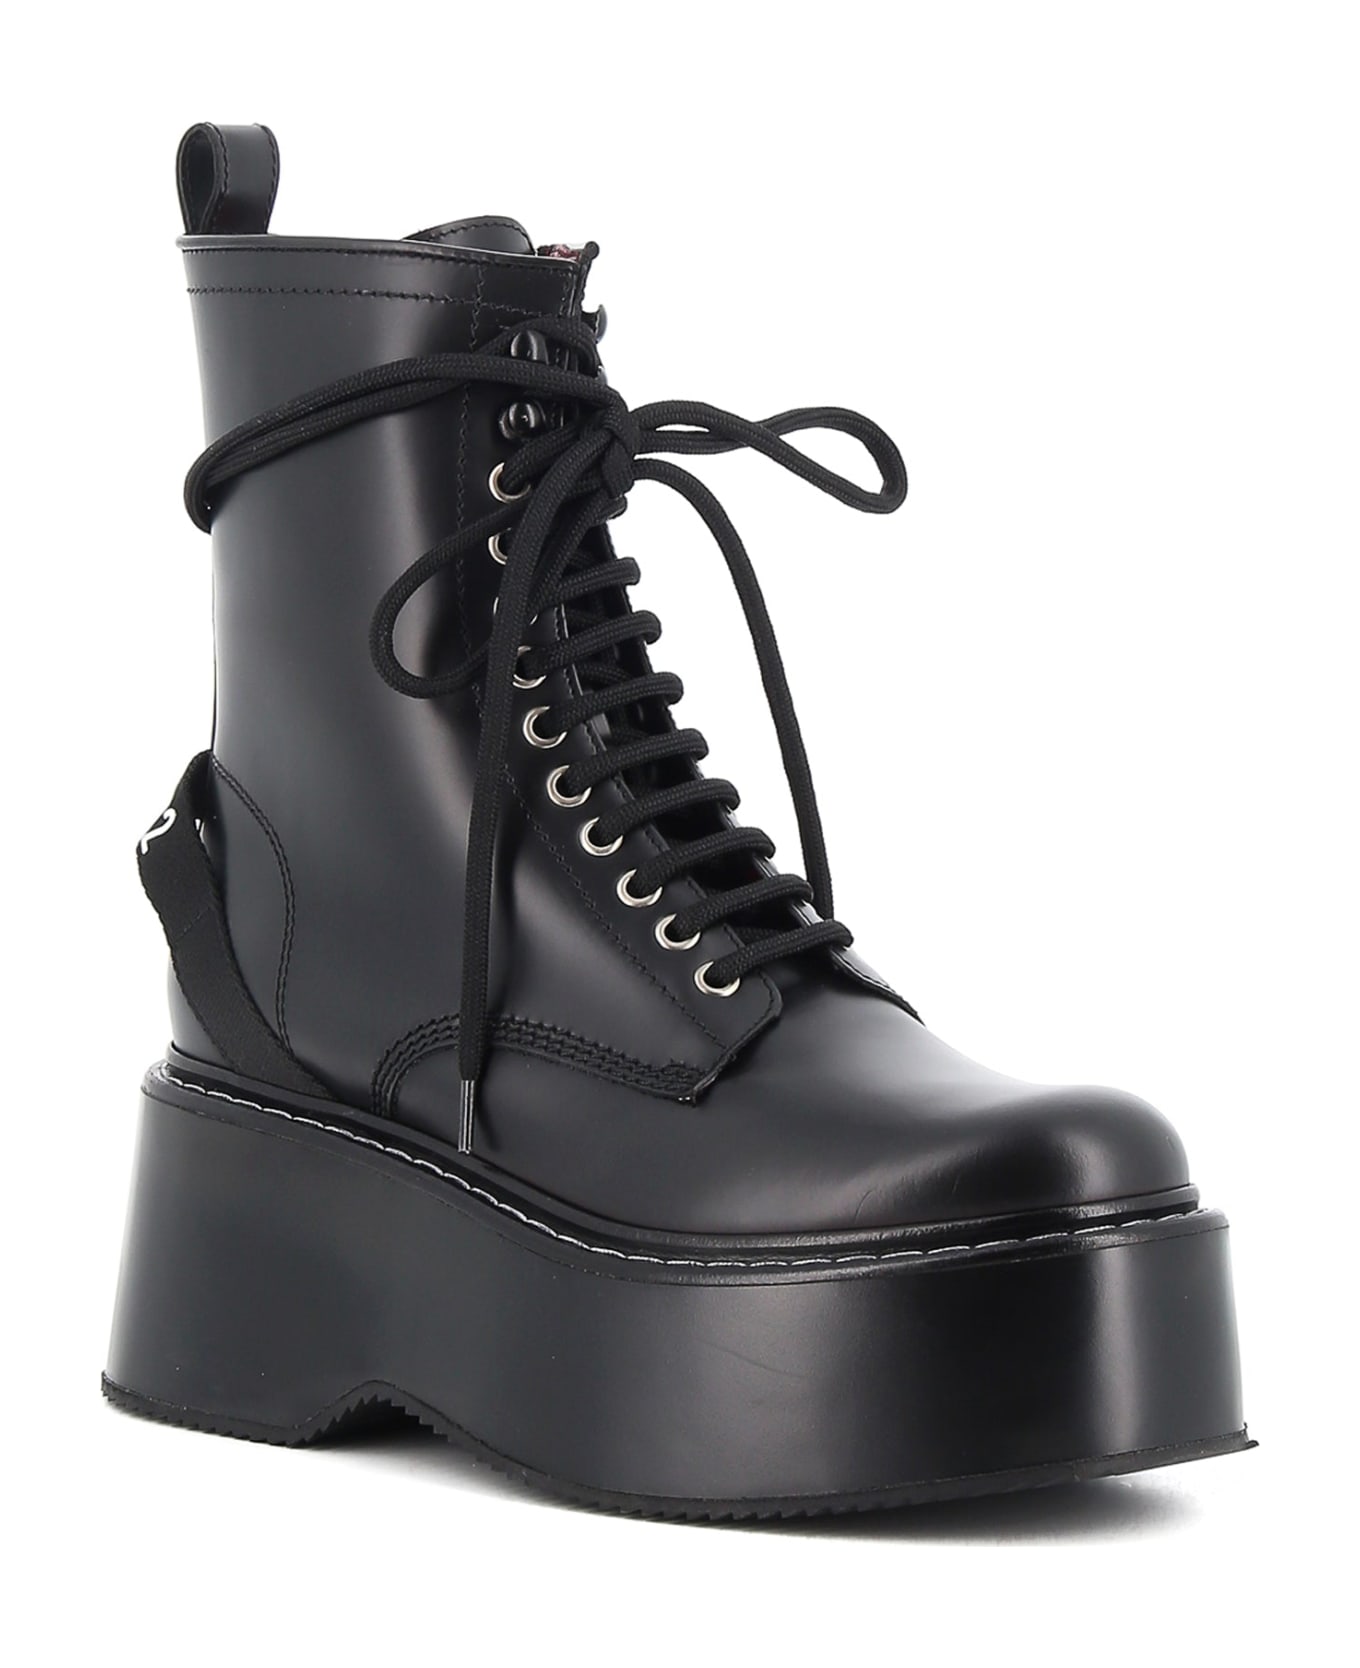 Dsquared2 Lace Up Leather Boots - Black